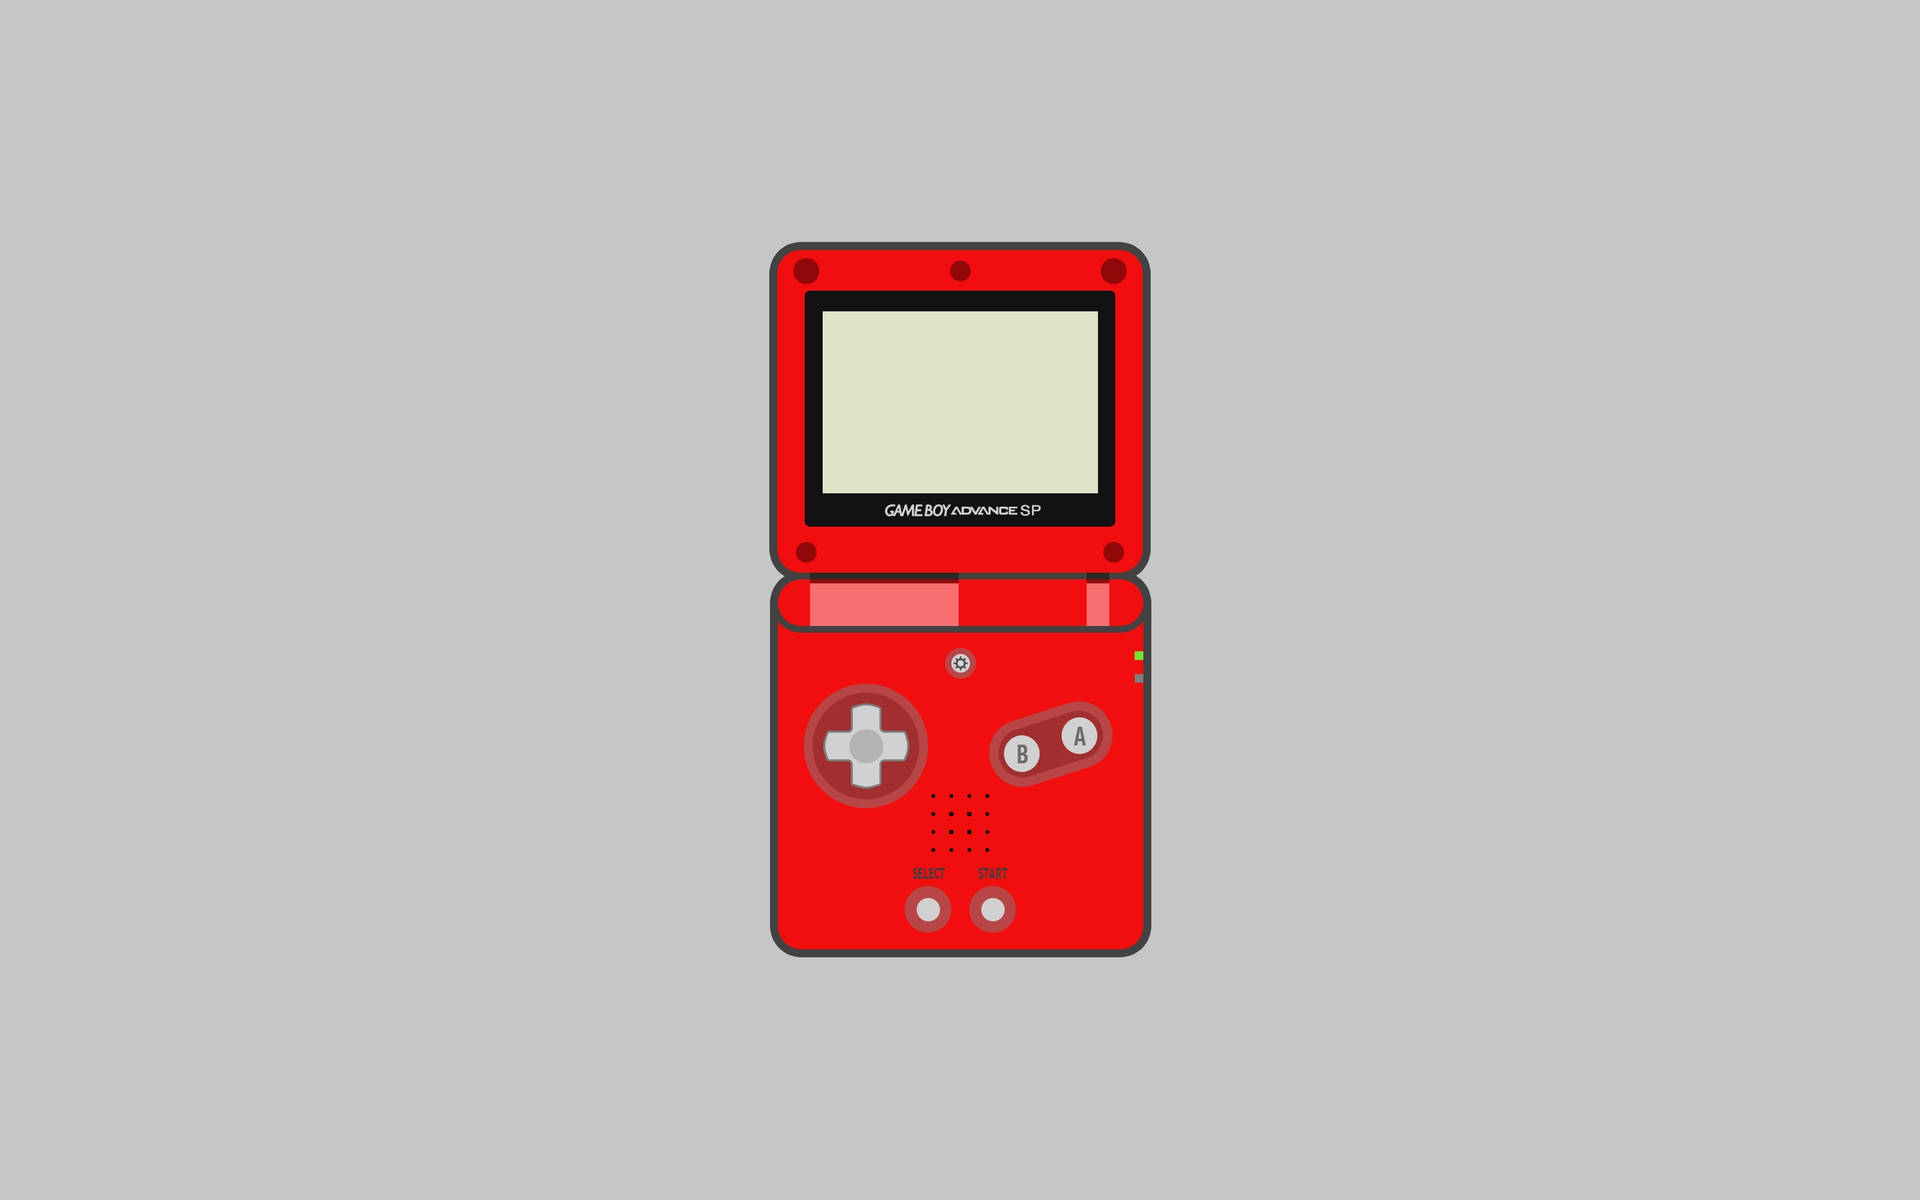 Simple Art Of Red Game Boy Advance Sp